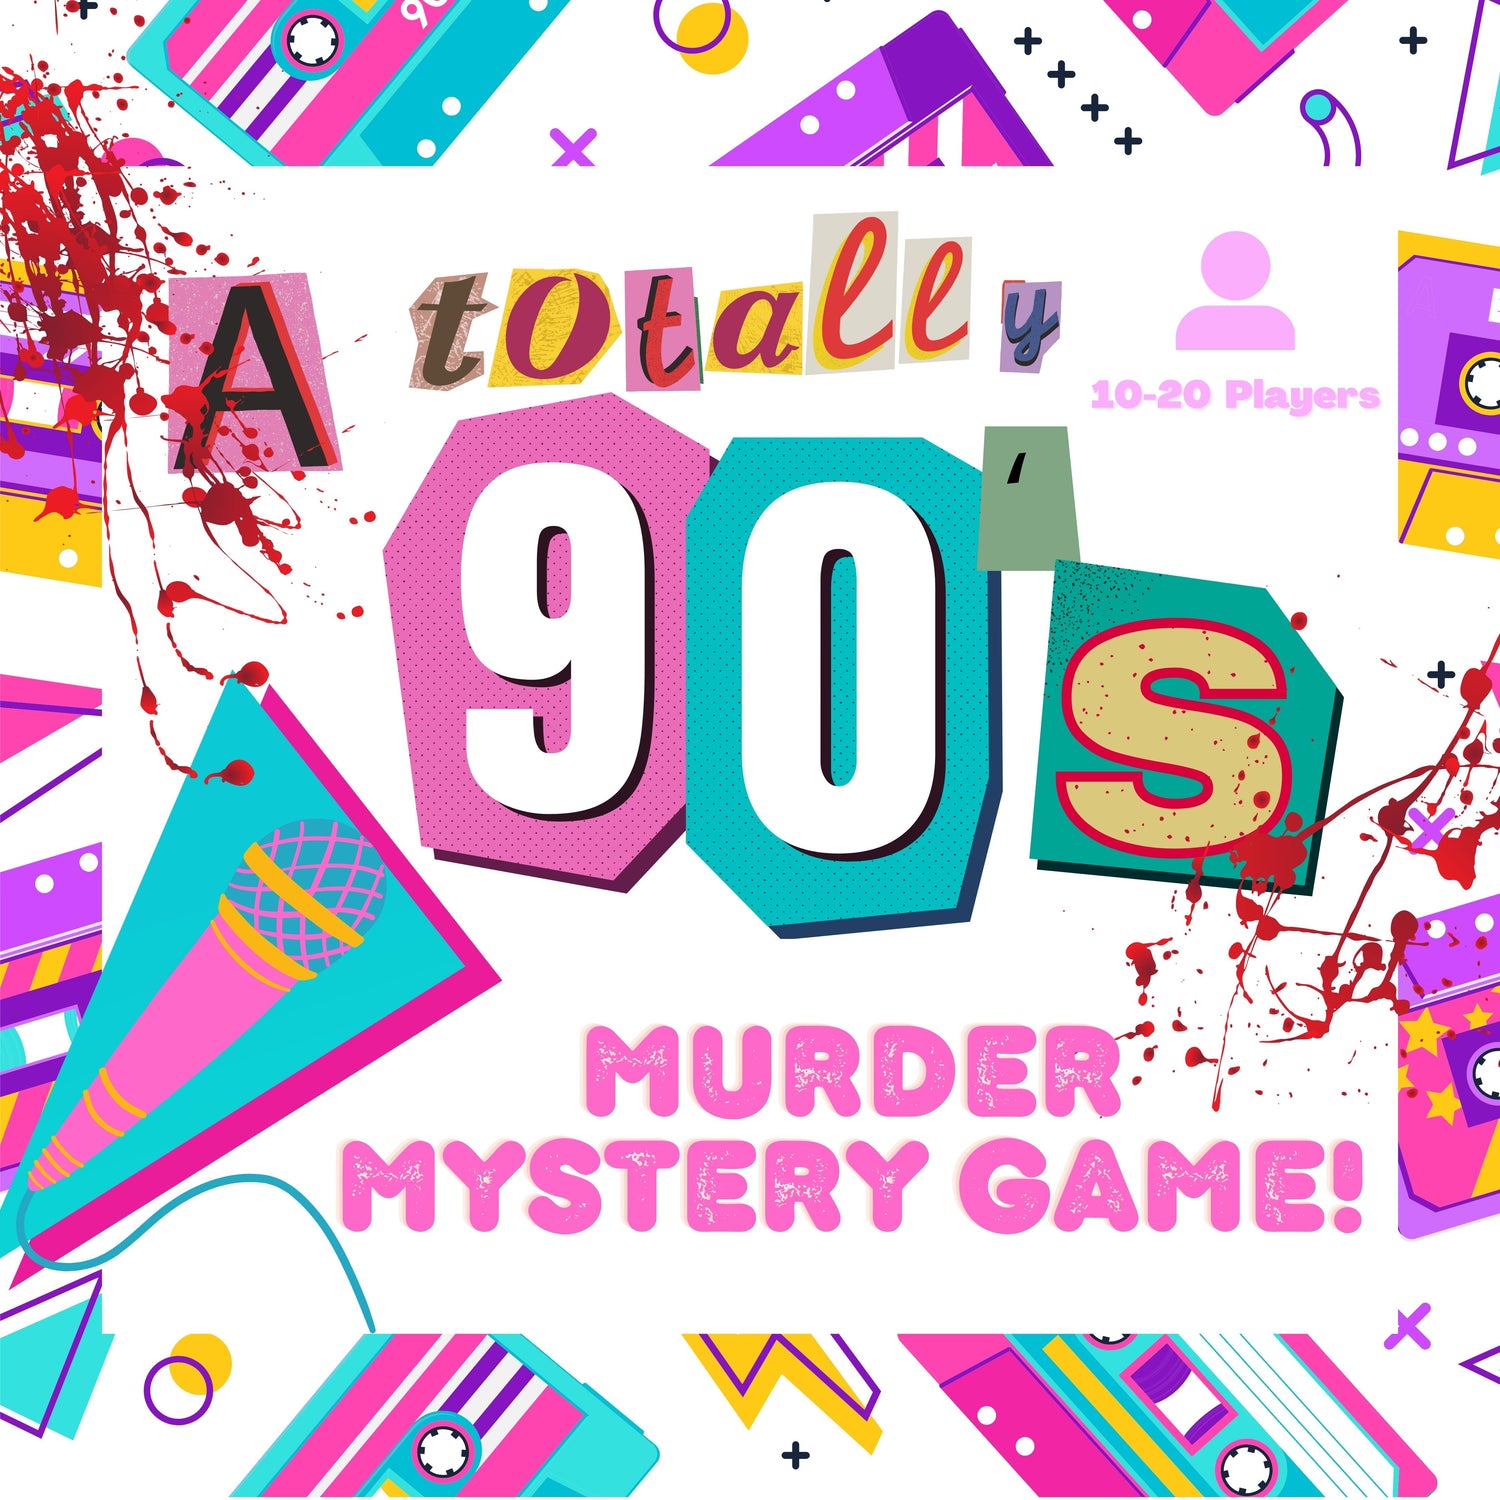 Fun and colourful 90s music themed evidence based mingling murder mystery party game for 10-20 people